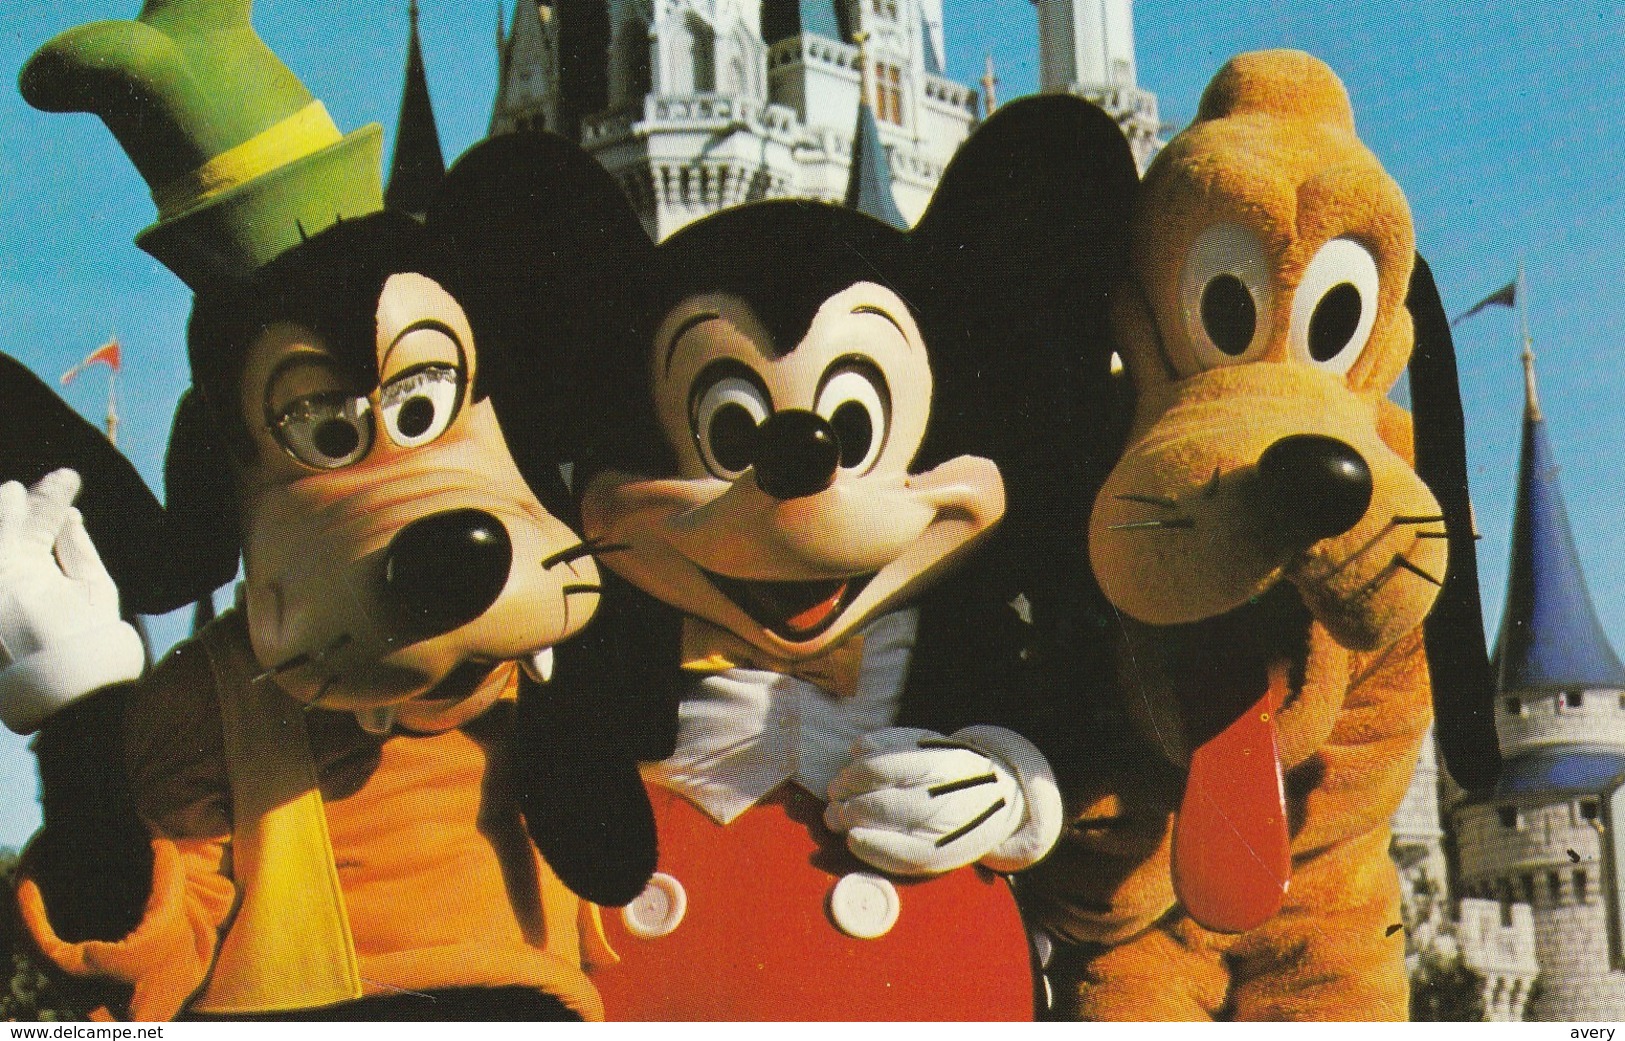 Goofy, Mickey Mouse And Pluto Greet Magic Kingdom Guests With Hearty Handshakes And Hugs Galore. - Disneyworld